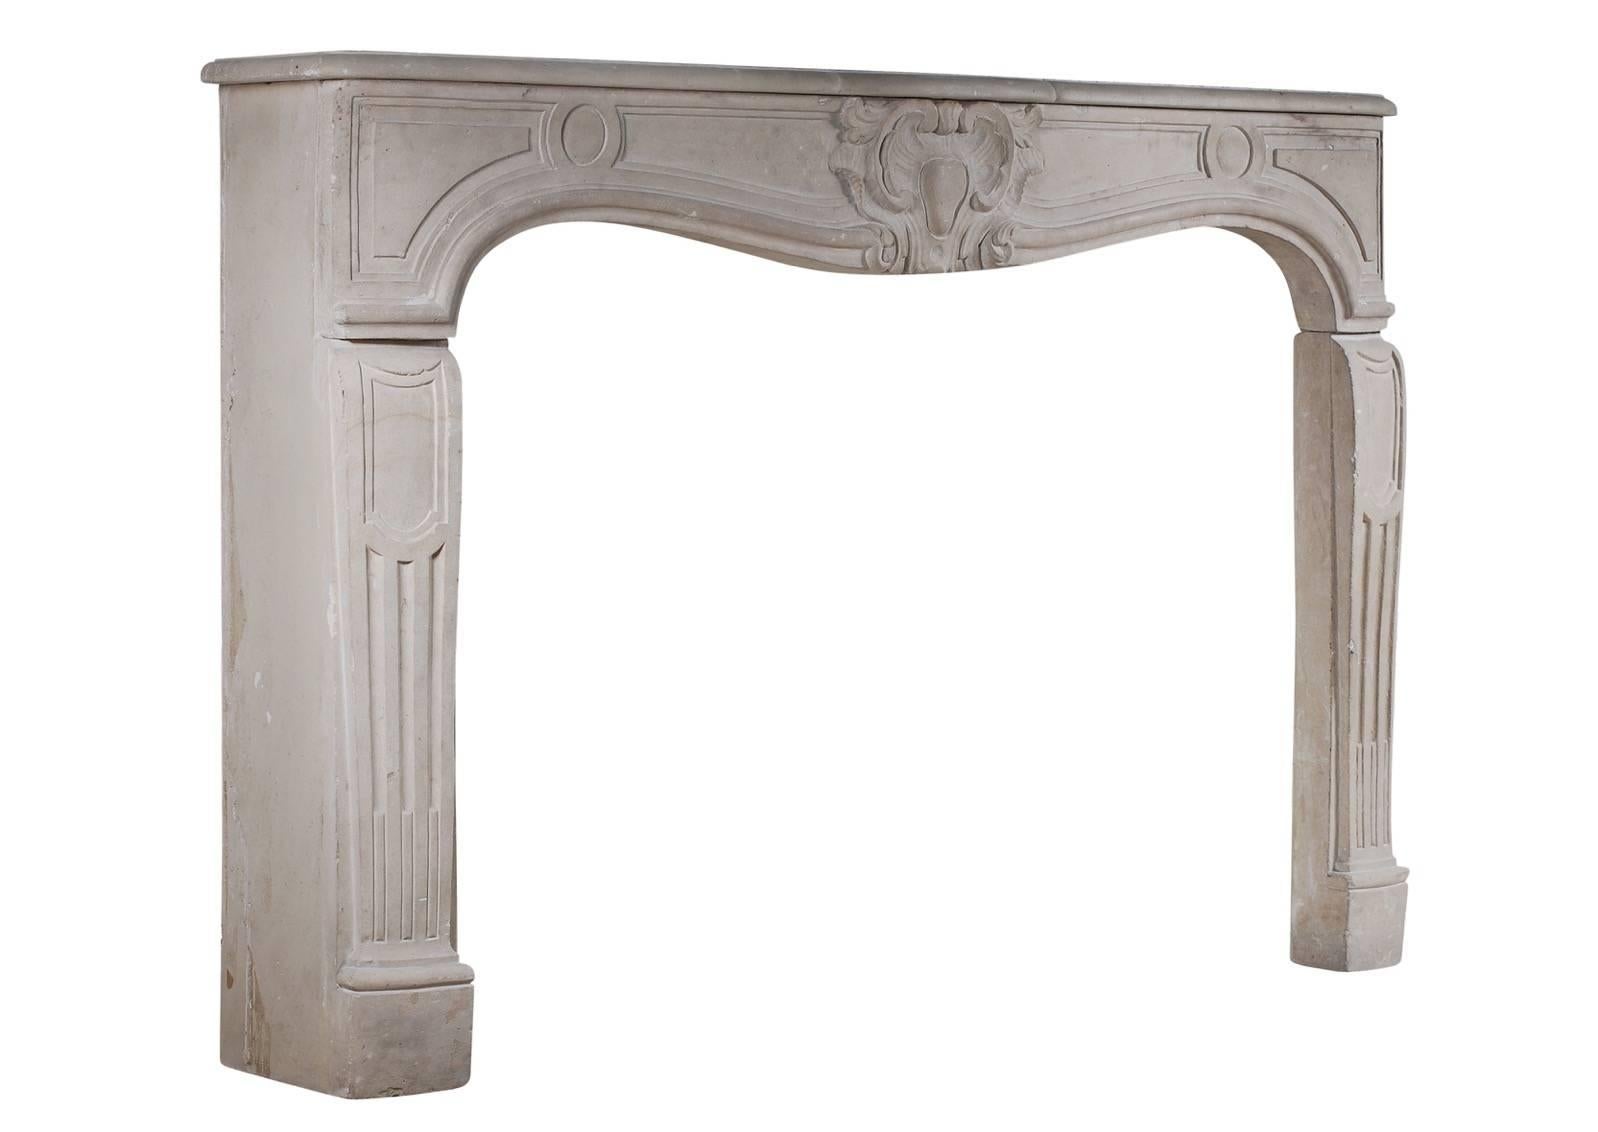 A 19th century French limestone fireplace in the Louis XV style. The panelled, carved frieze with cartouche to centre, the shaped jambs with stop-flutes and panels. Shaped shelf. Good patination of stone. (Near pair to 3790)

Measures: 
Shelf width